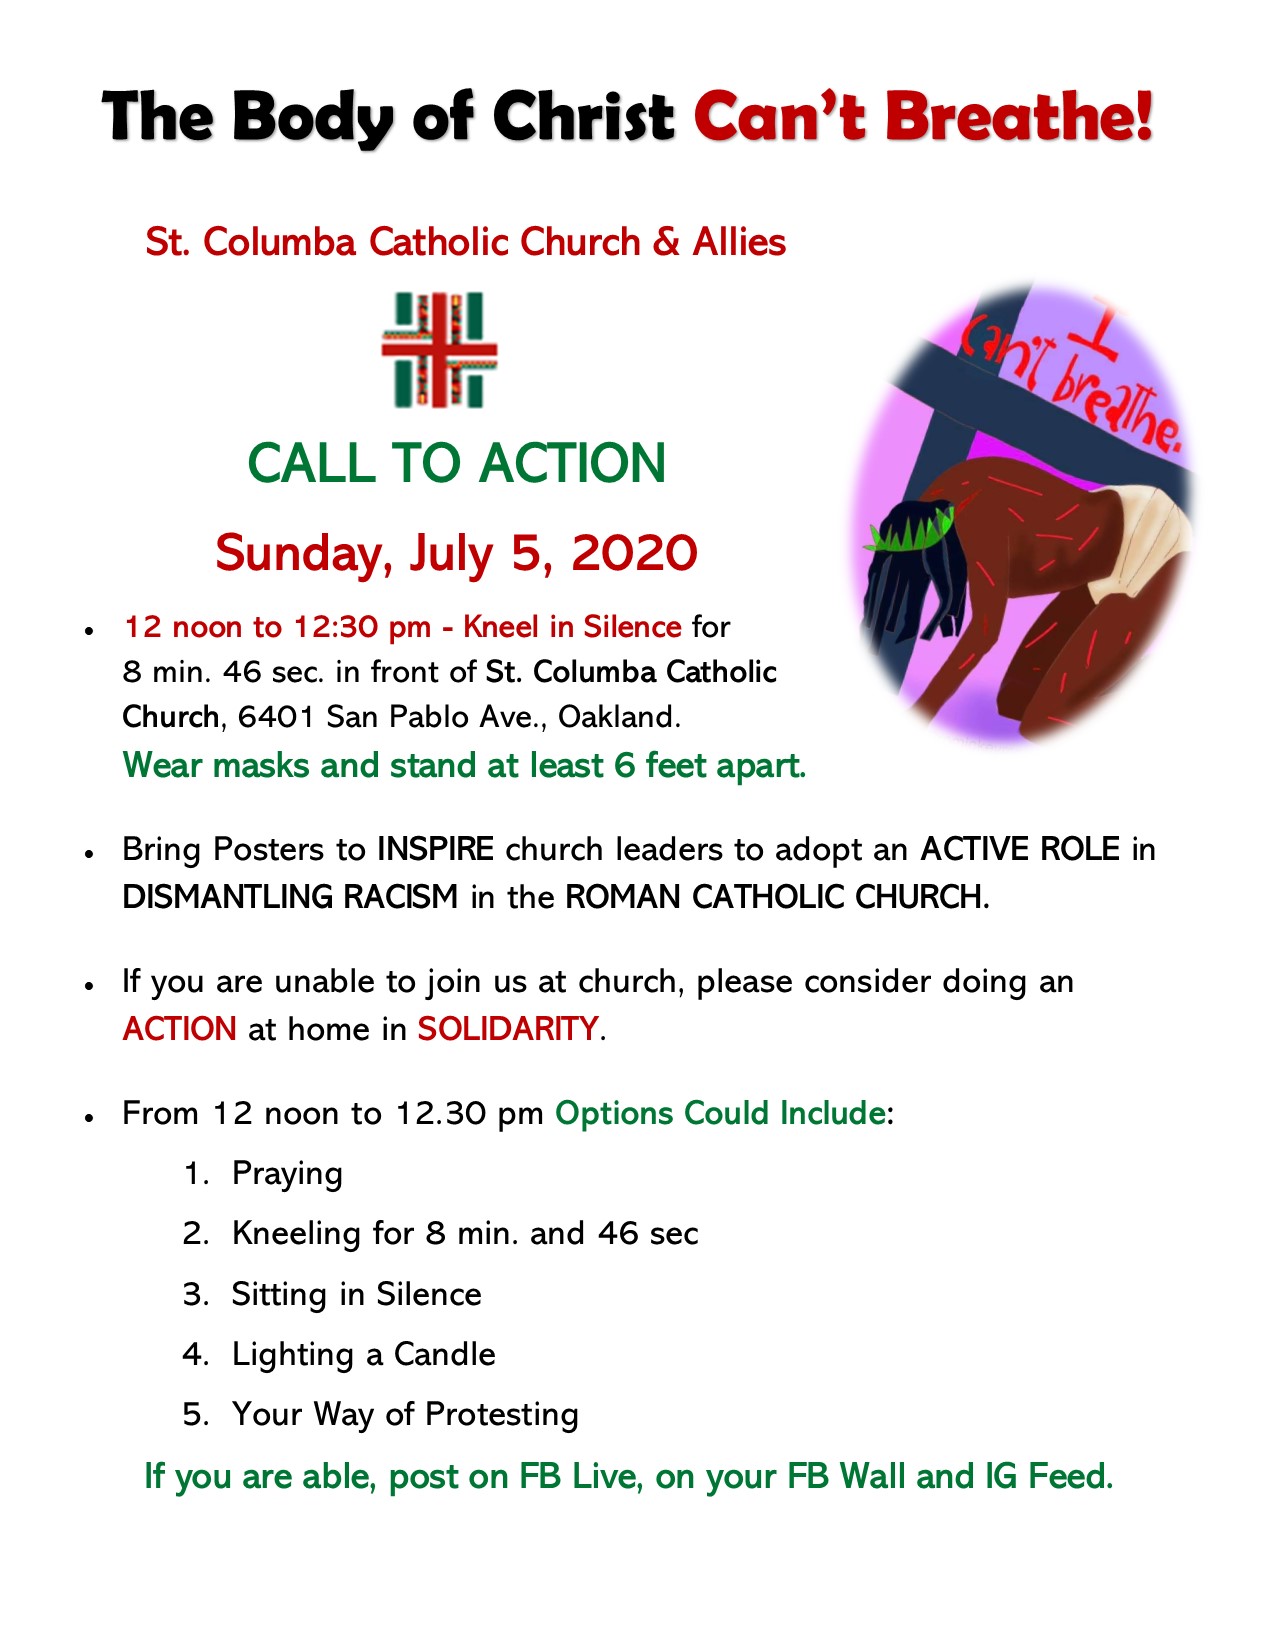 St Columba Body Of Christ Cant Breathe 2020